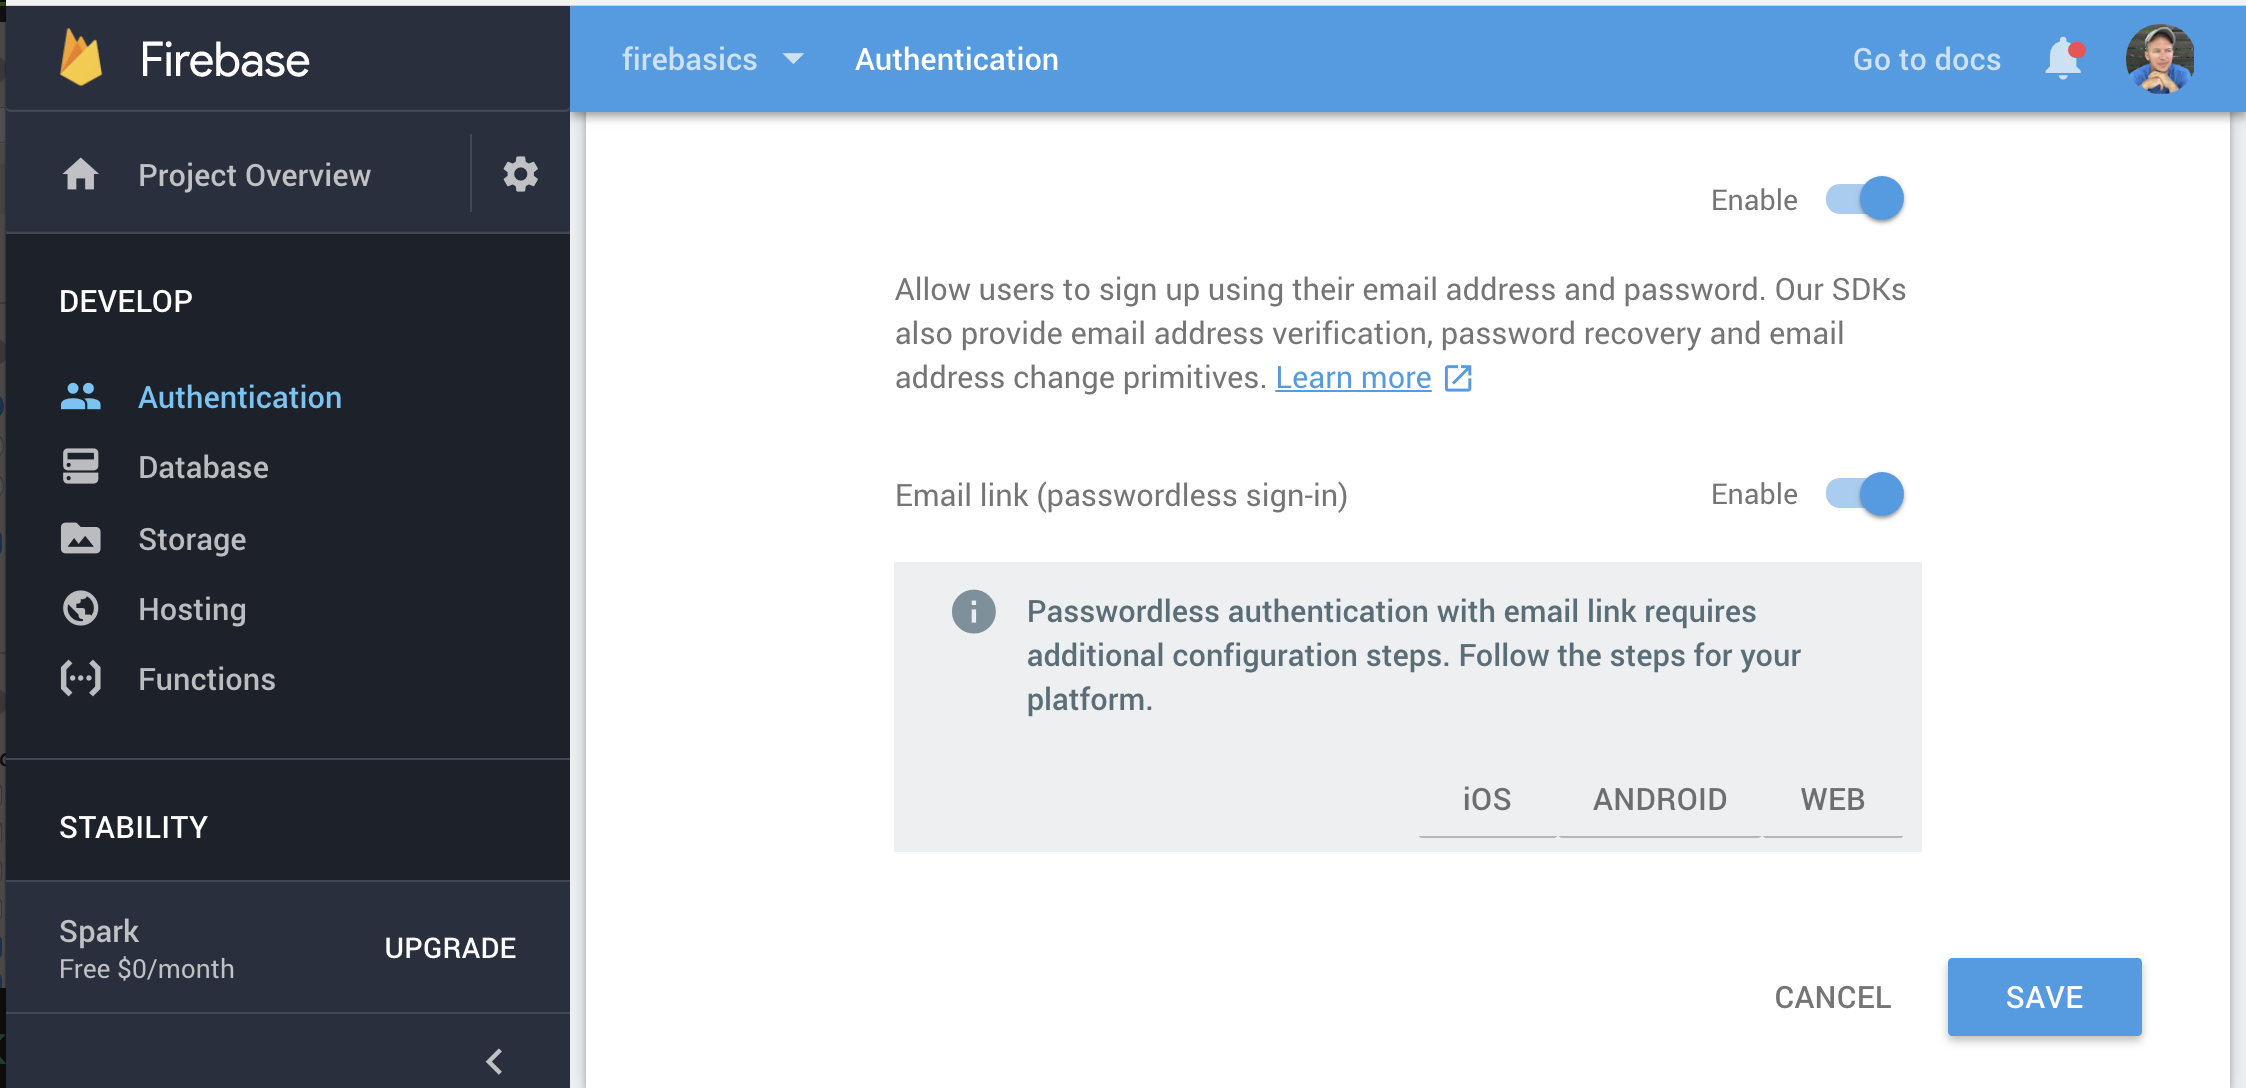 where to enable passwordless email link signin on the firebase console